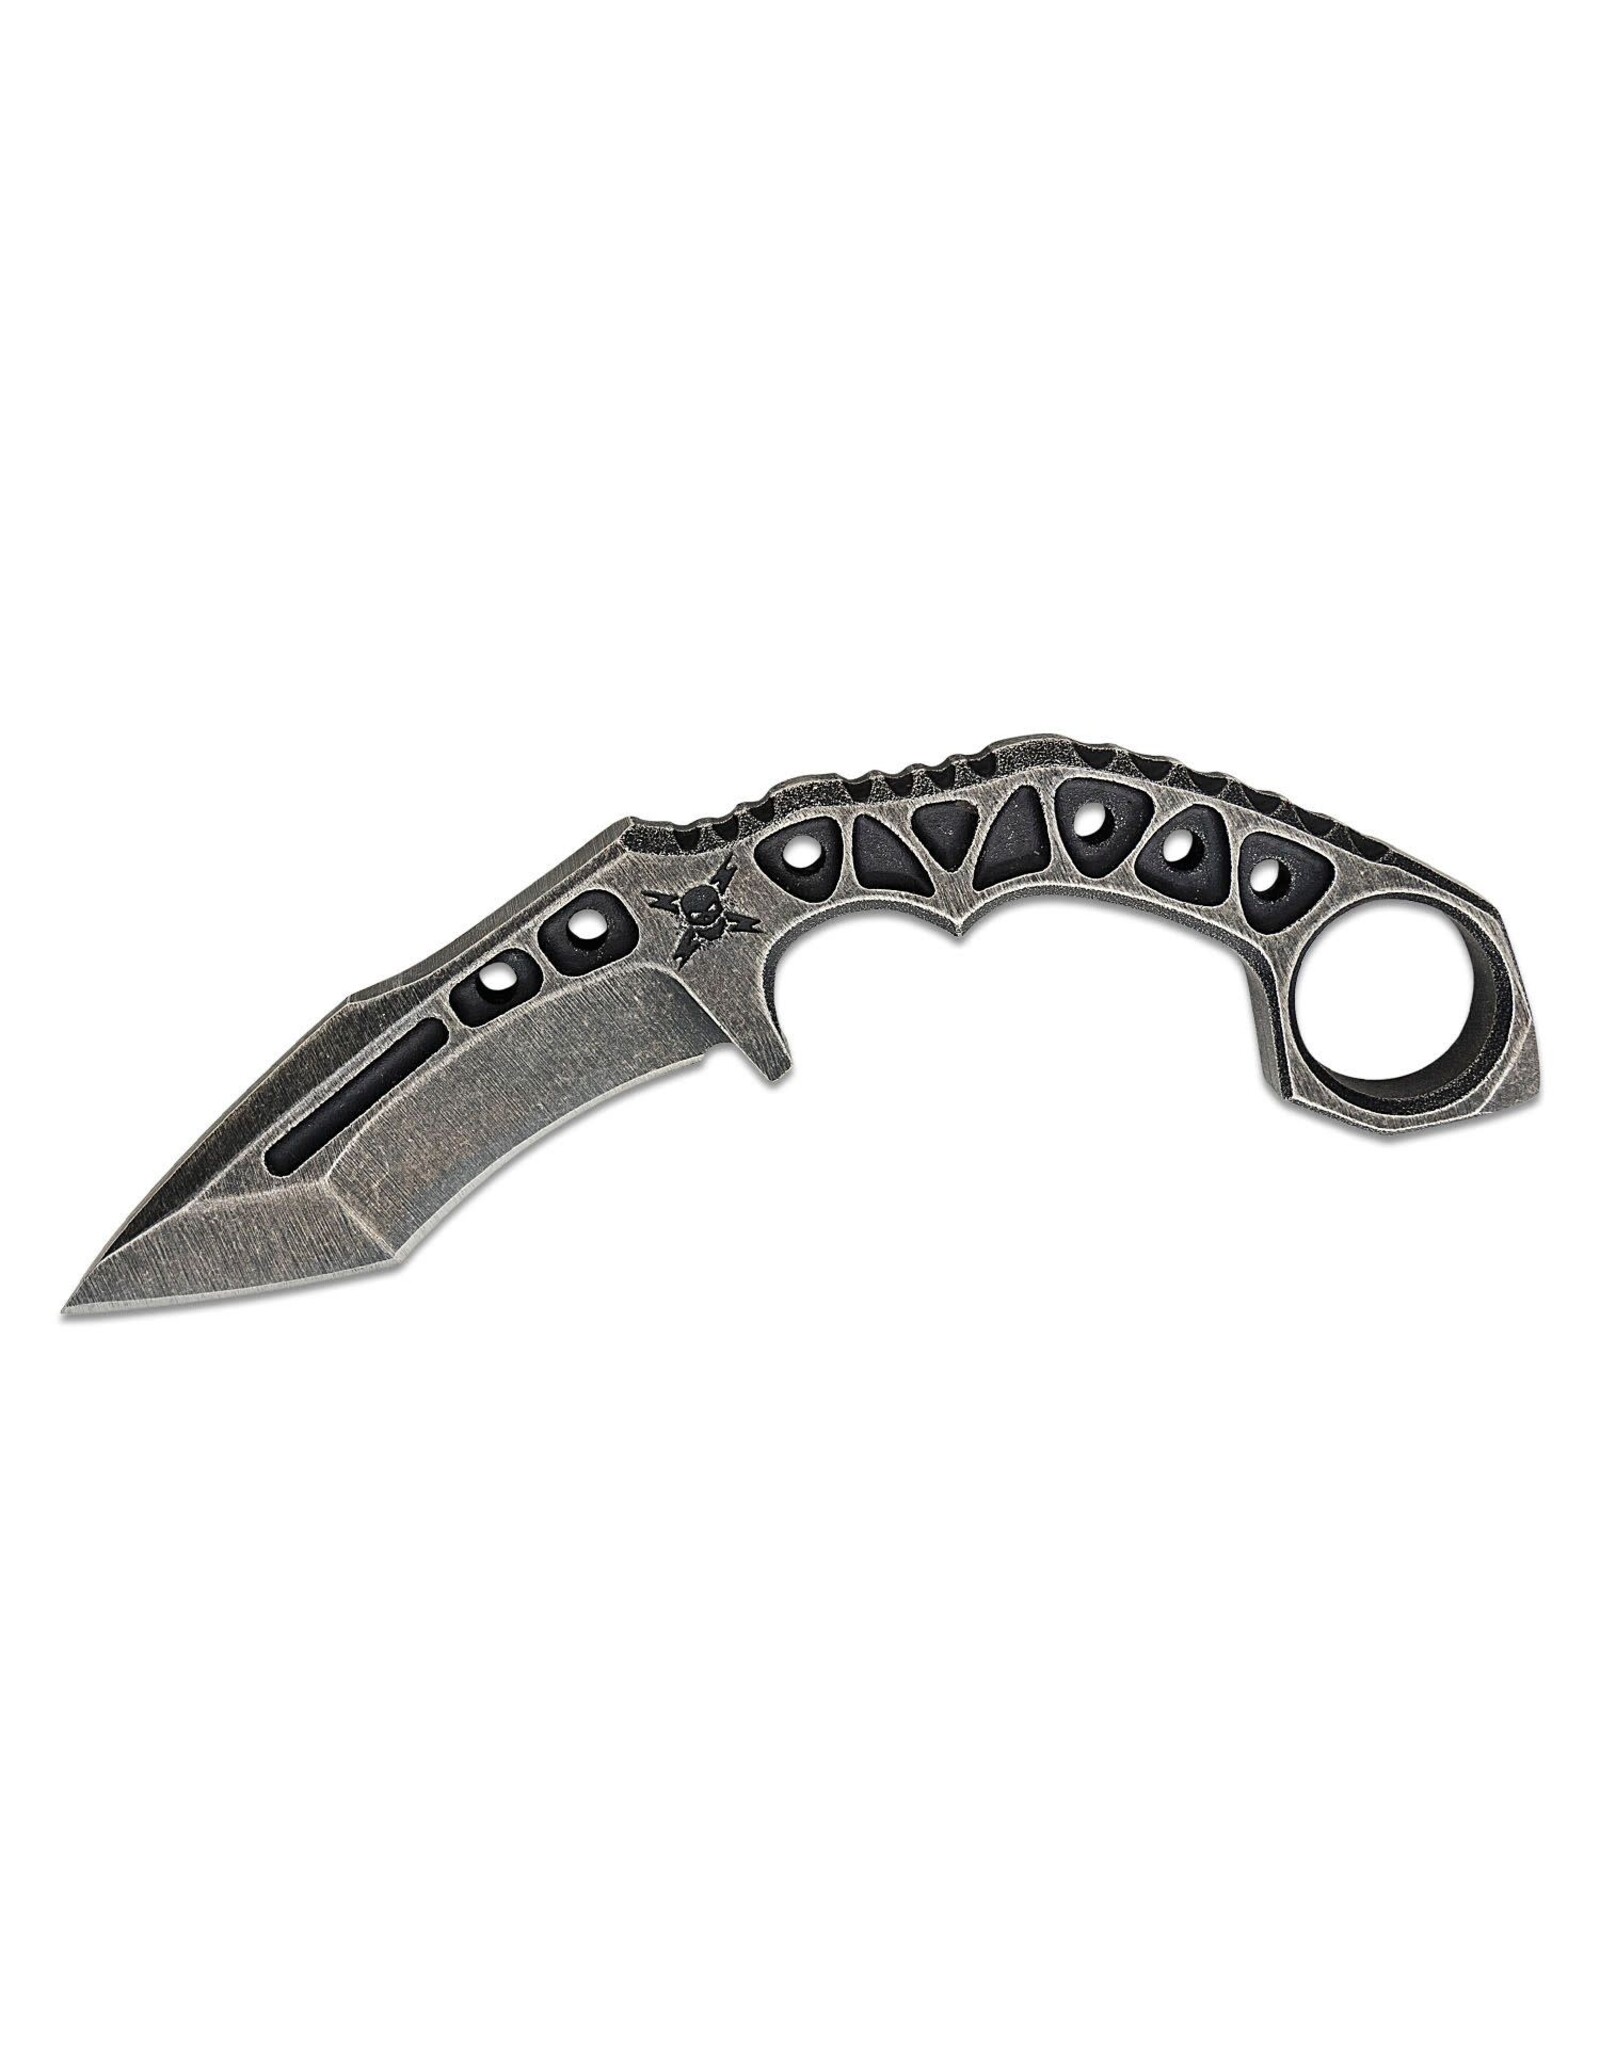 United Cutlery M48 Tanker Combat Karambit 4.5" Black Stonewashed Recurve Tanto Blade, One-Piece Construction with Pinky Ring, Kydex Belt Sheath - UC3443